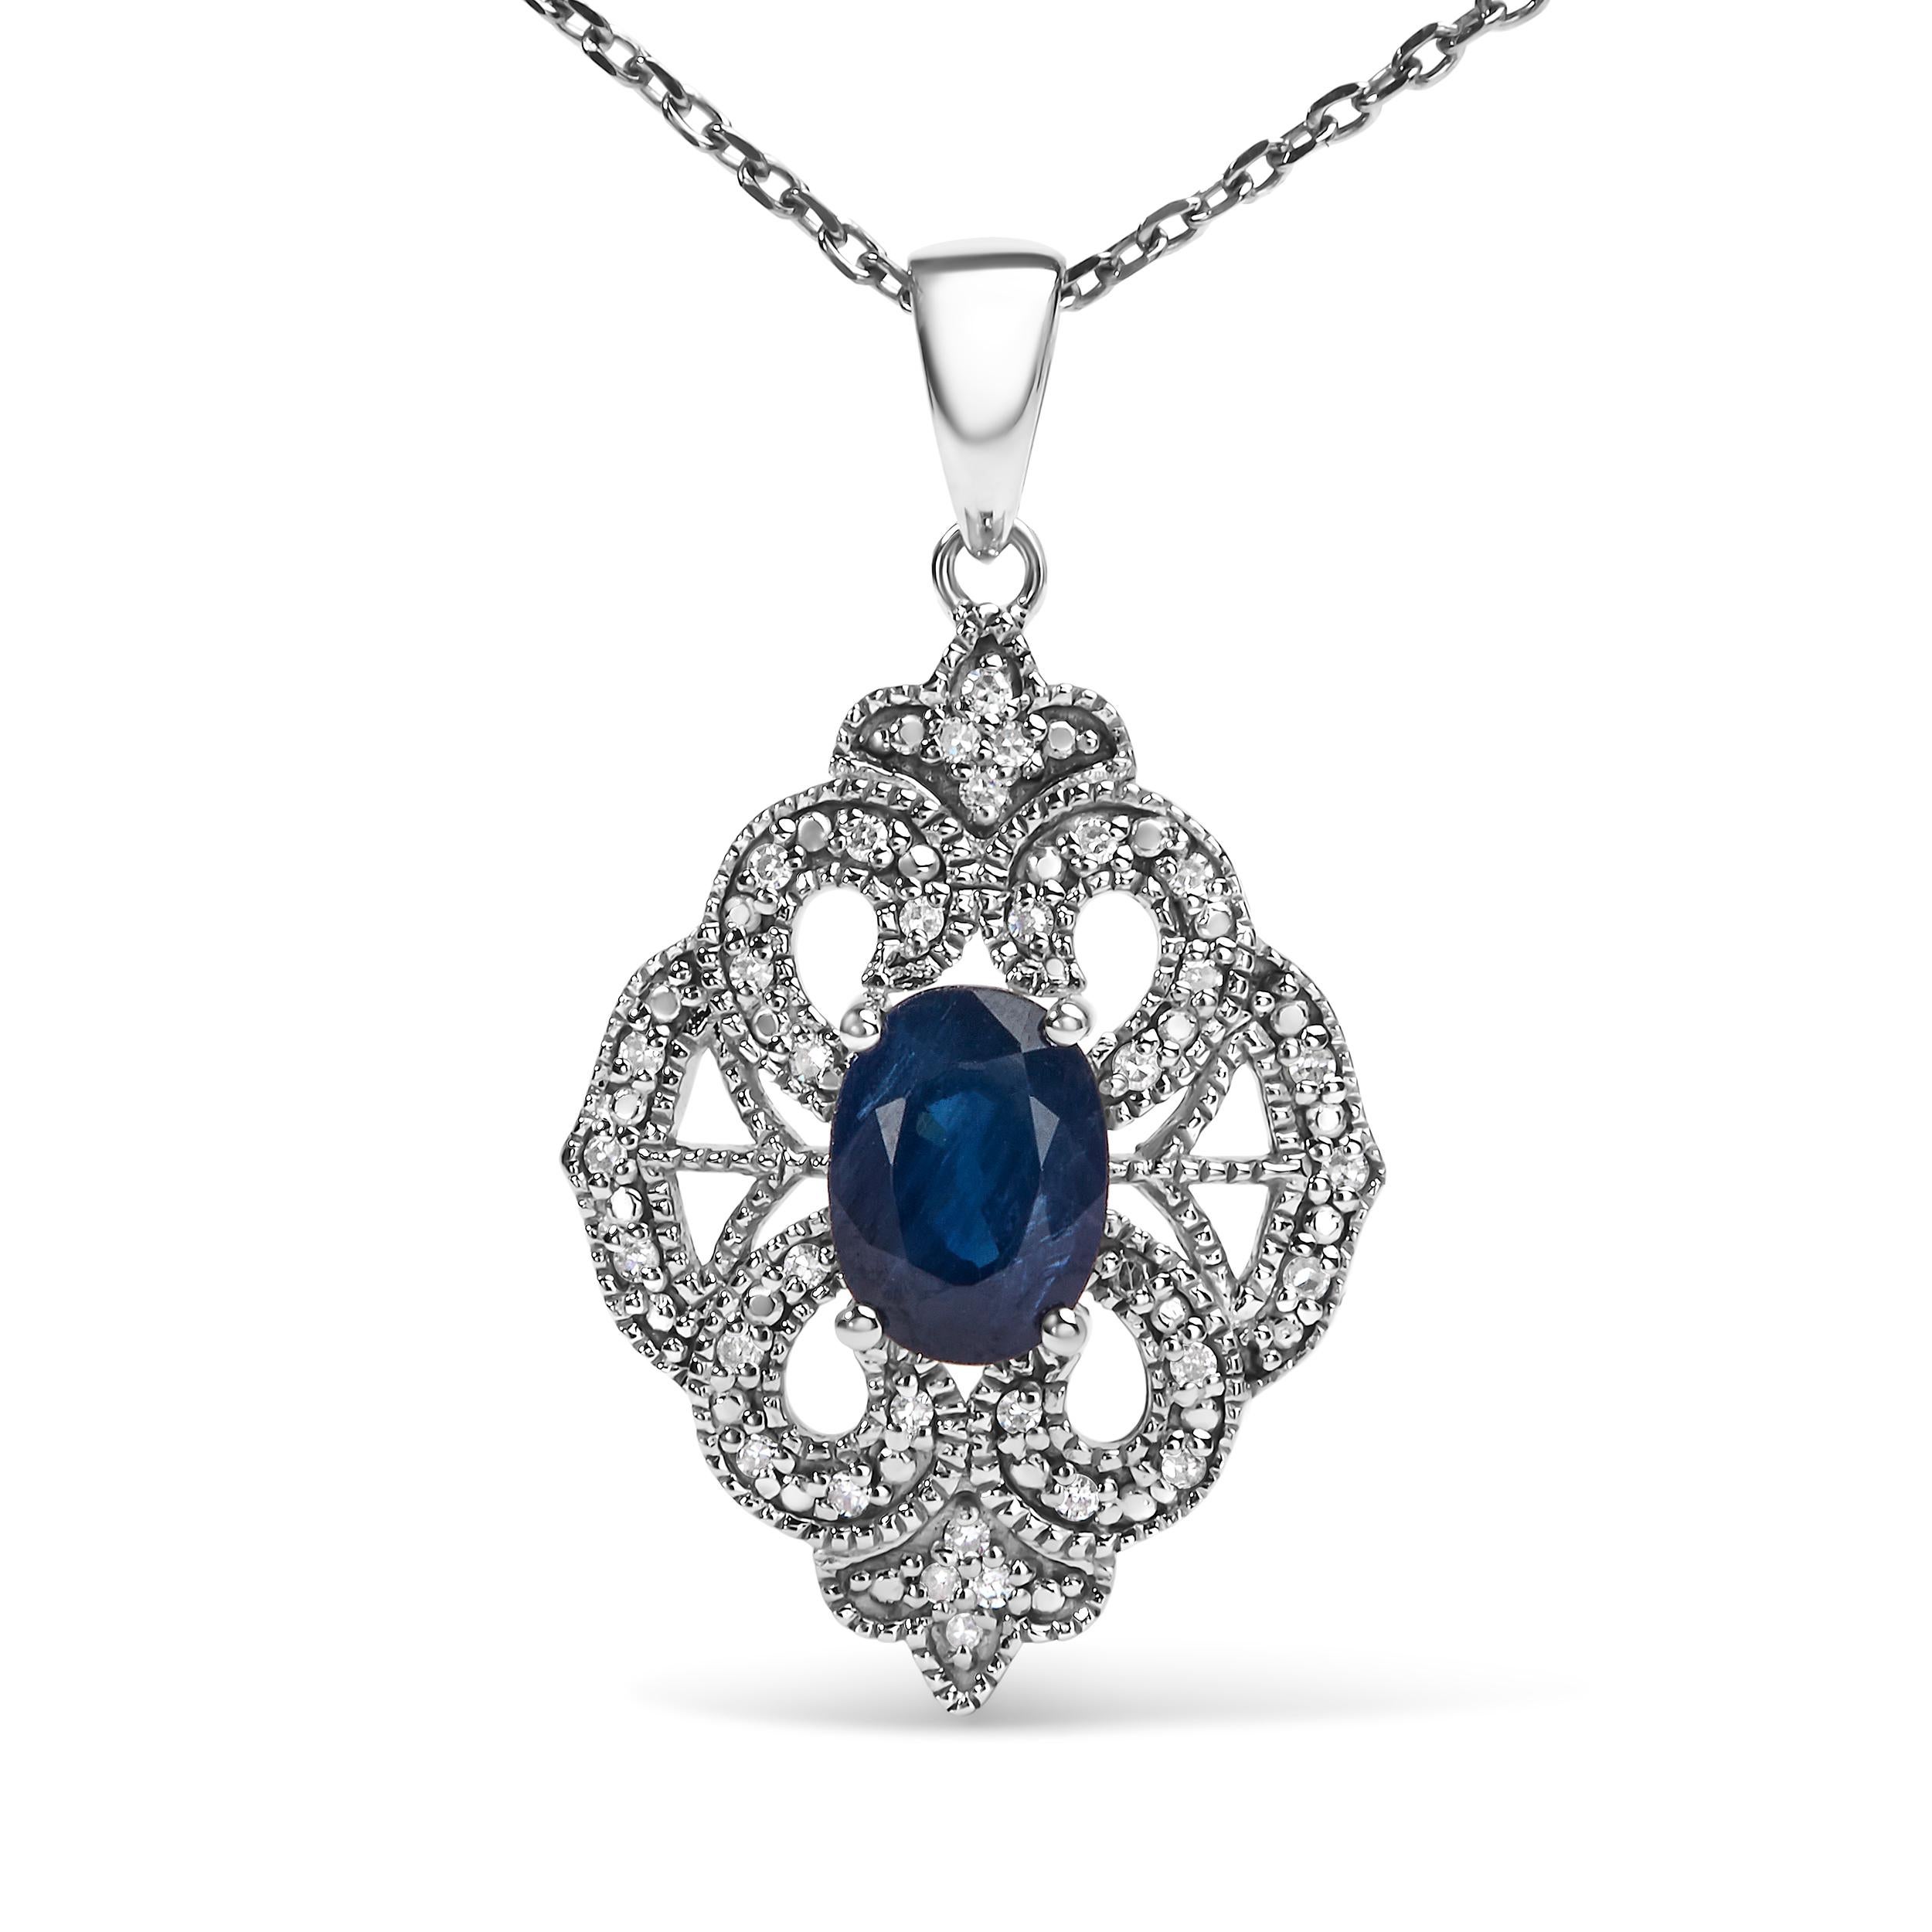 Indulge in the ethereal beauty of this Art Deco style shield-shaped pendant necklace. Crafted with .925 sterling silver, it radiates elegance and grace. Adorned with a captivating 7x5 MM oval blue sapphire and 34 dazzling diamond accents, this